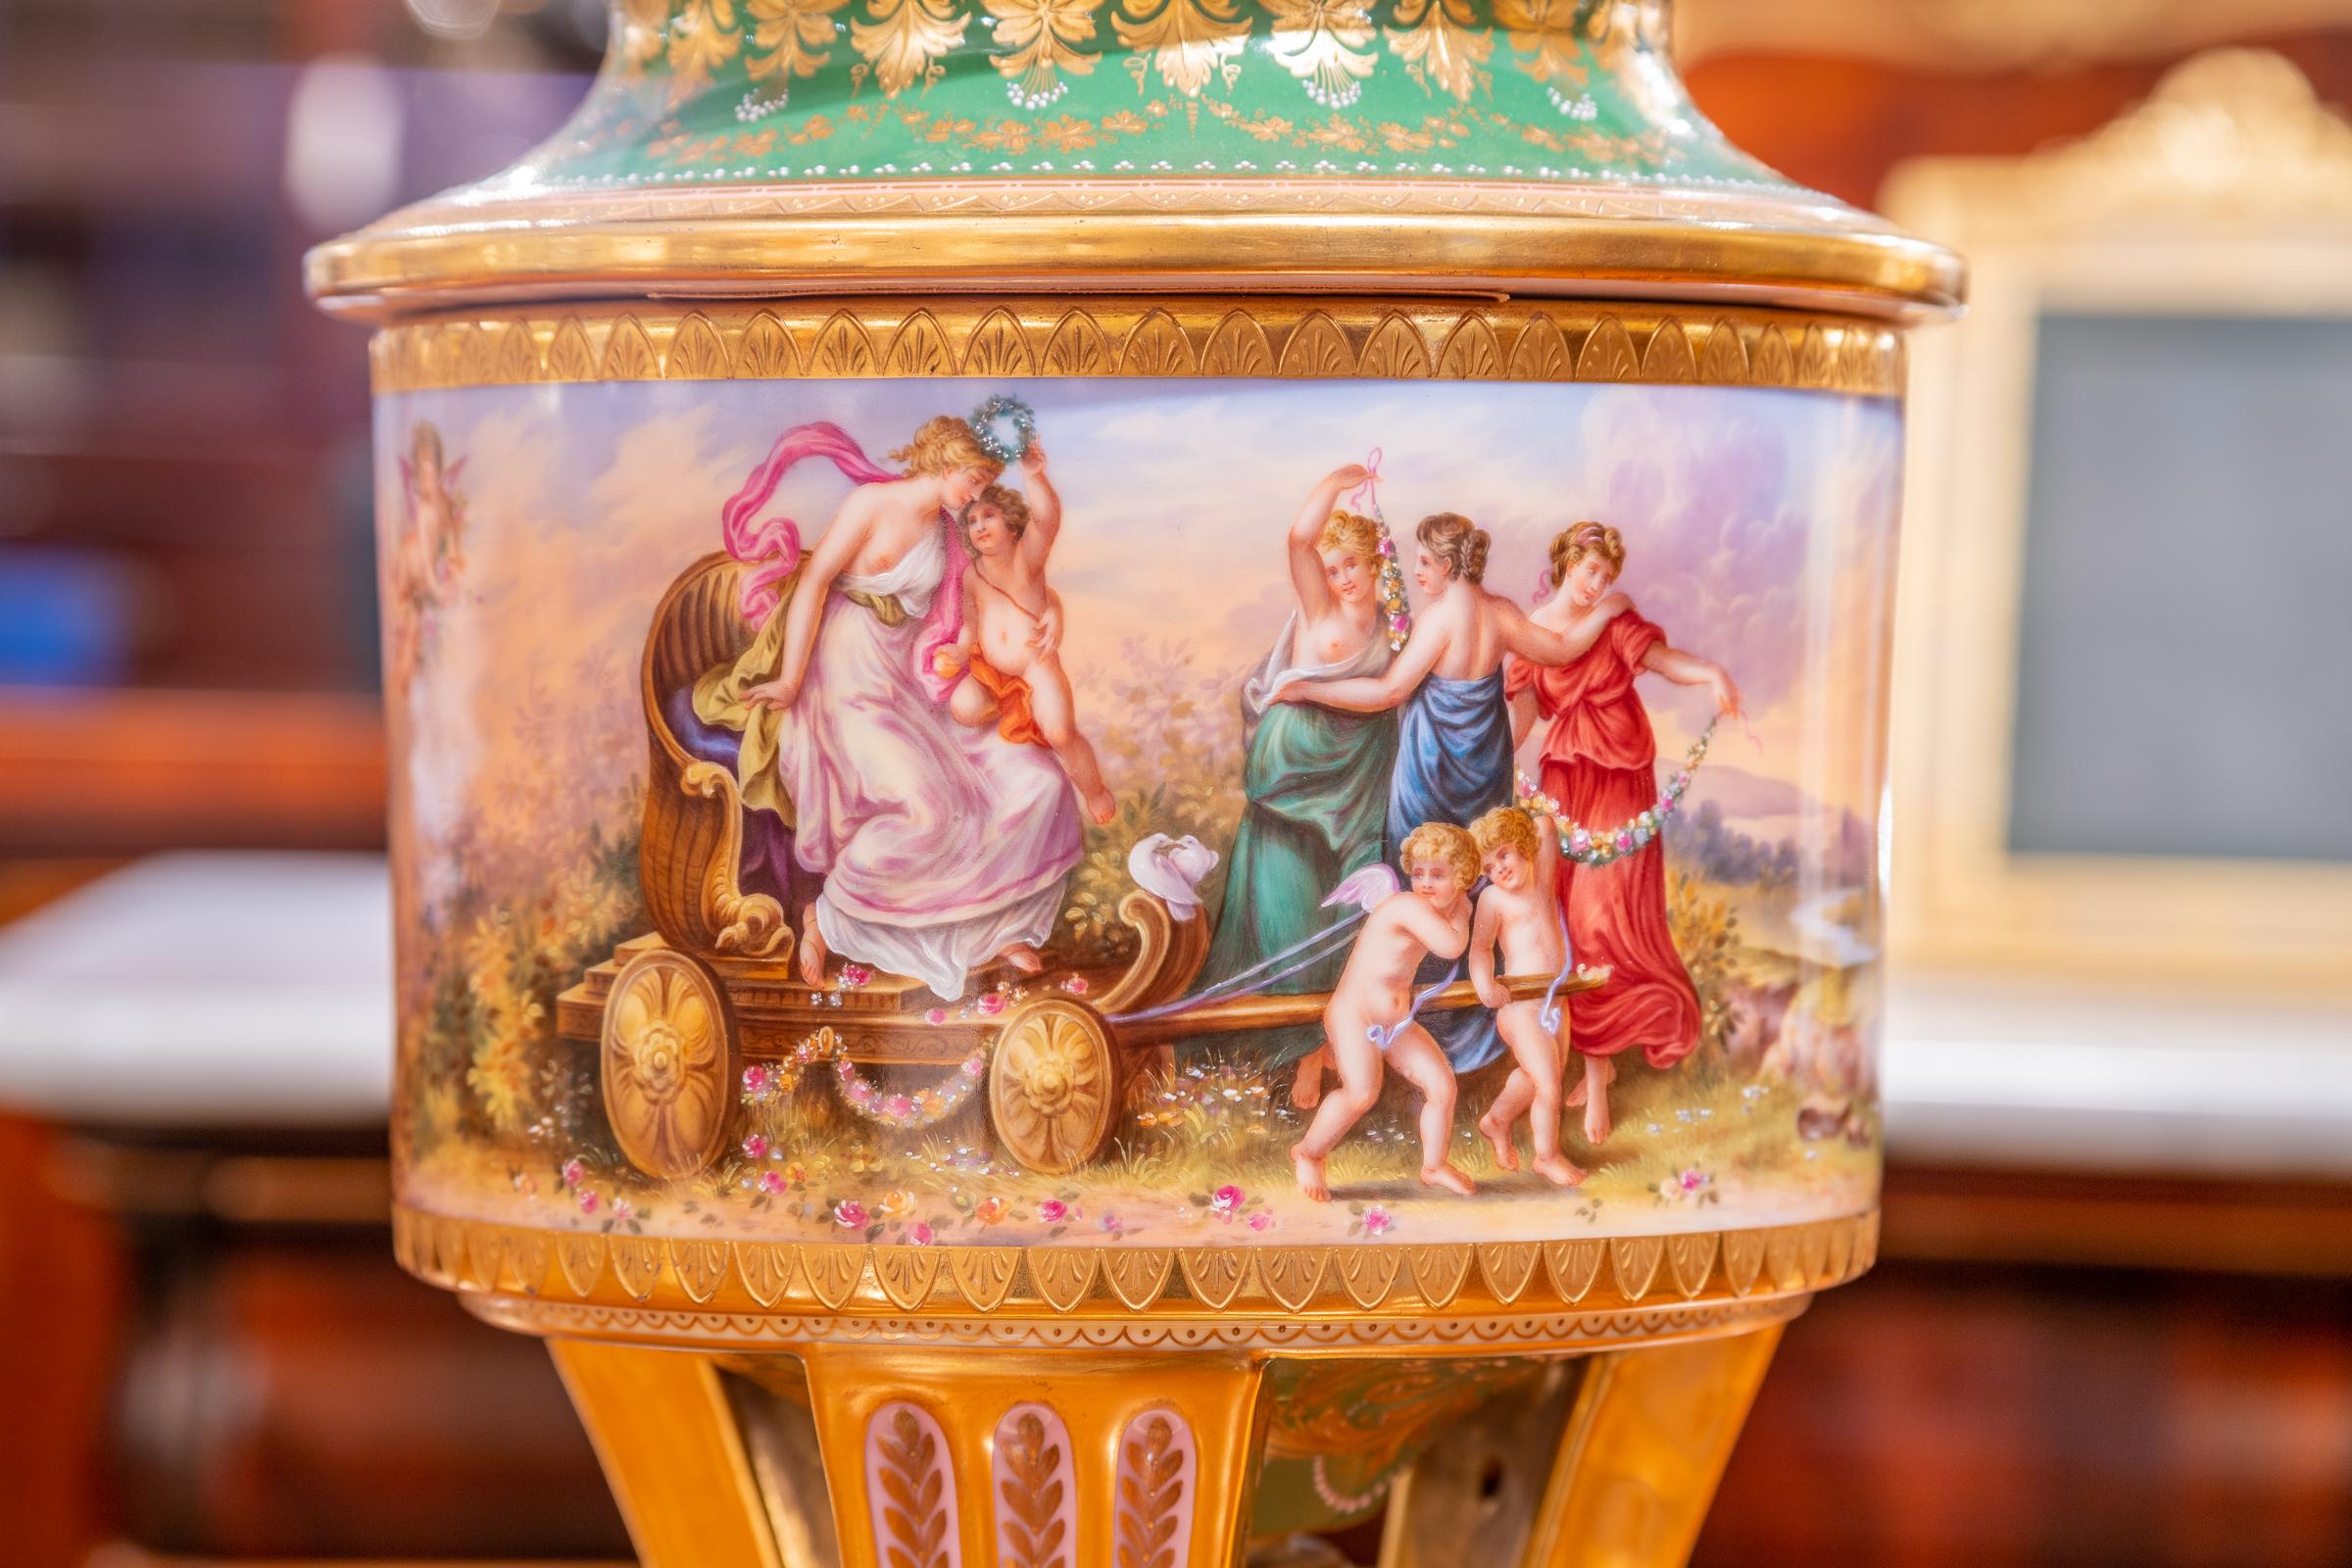 A fine 19th century Austrian Royal Viennese porcelain urn with hand painted classical scenes. Very fine detailed decoration.